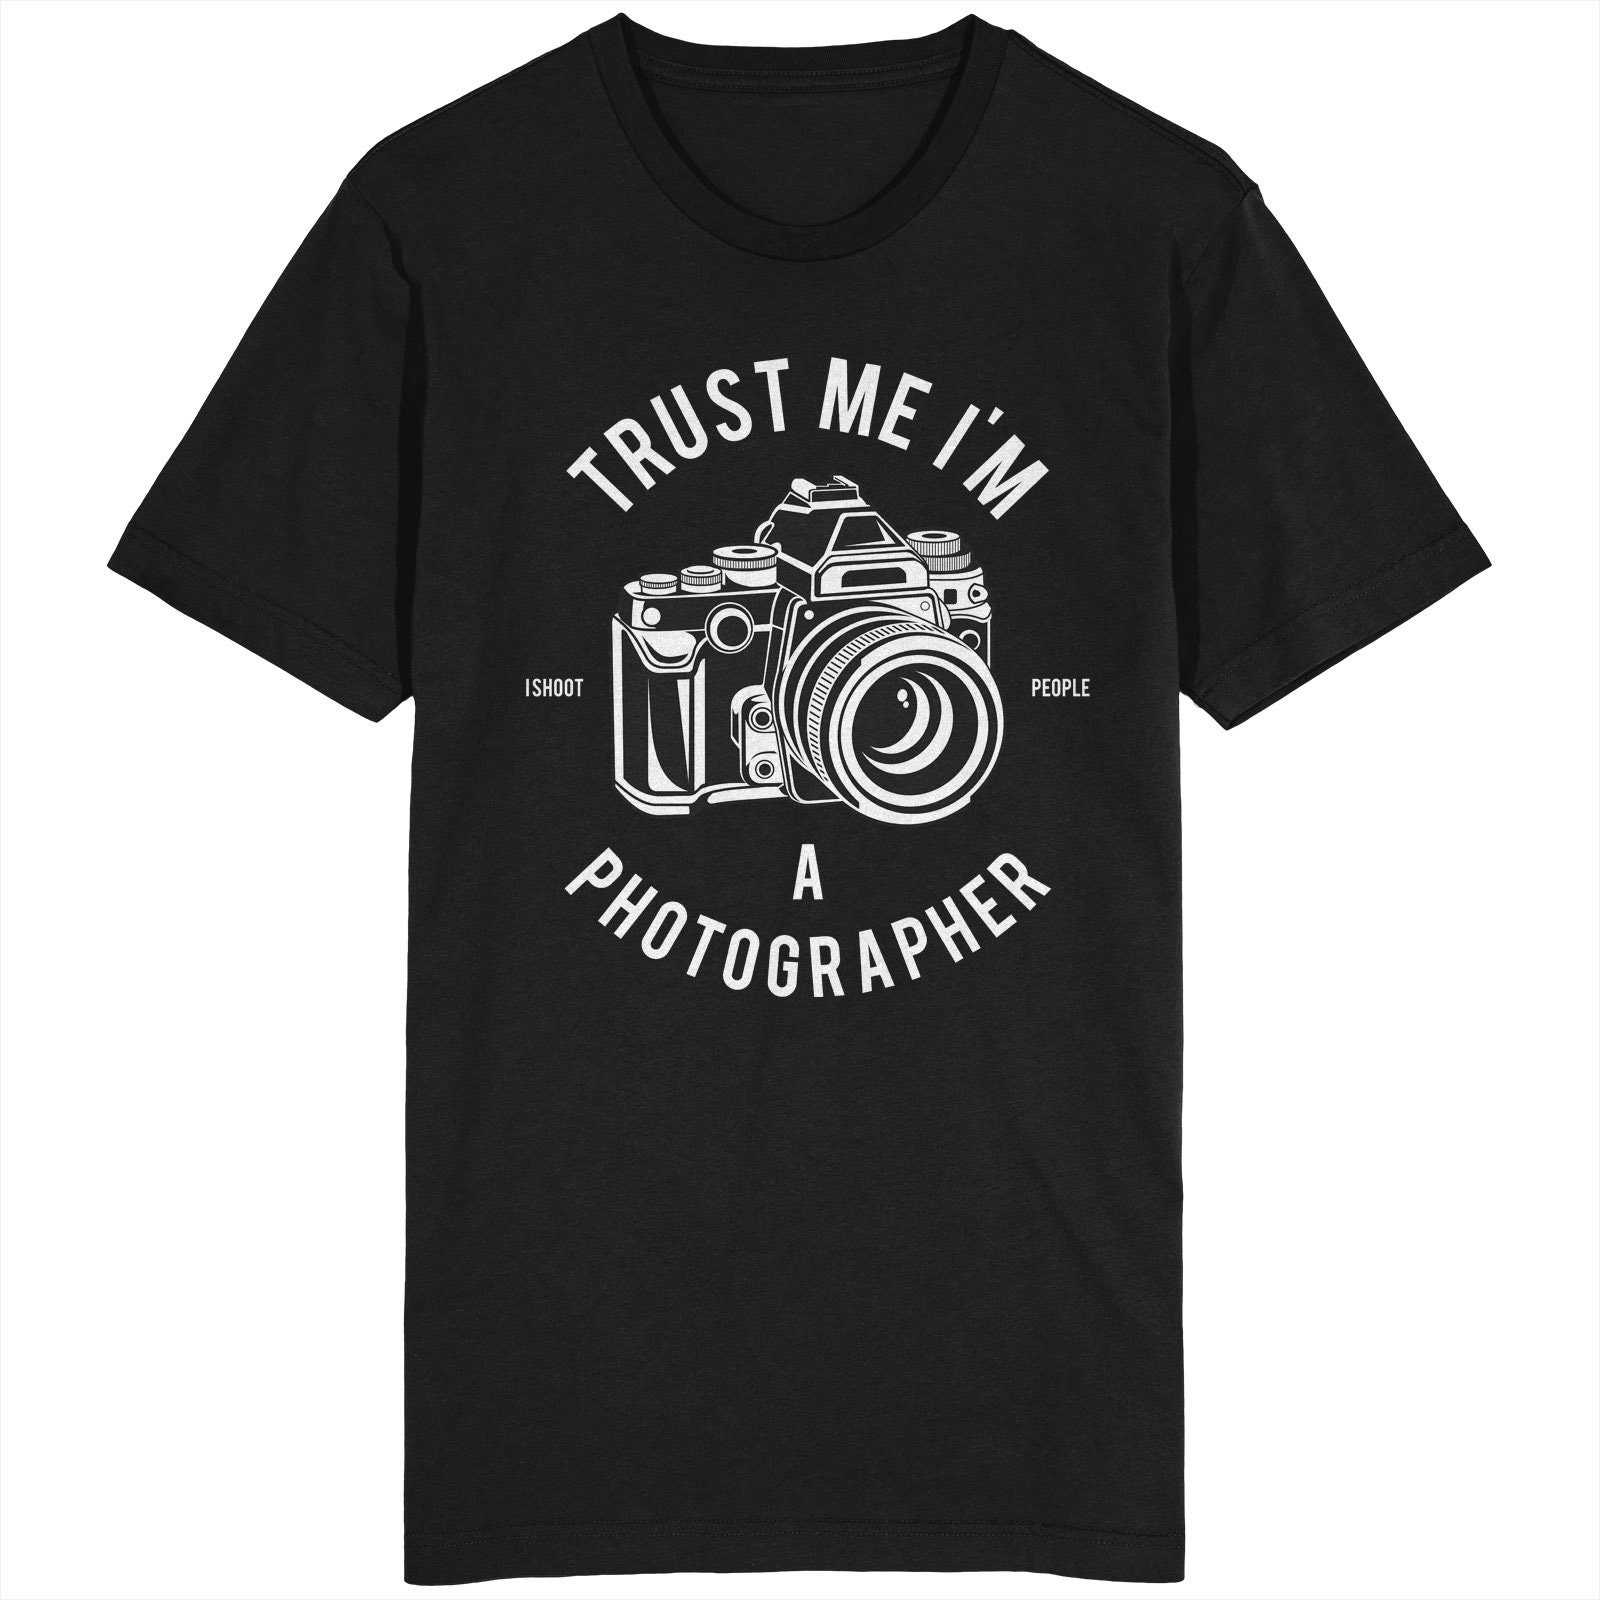 Trust me I'm a photographer black and white t shirt style modern new design 